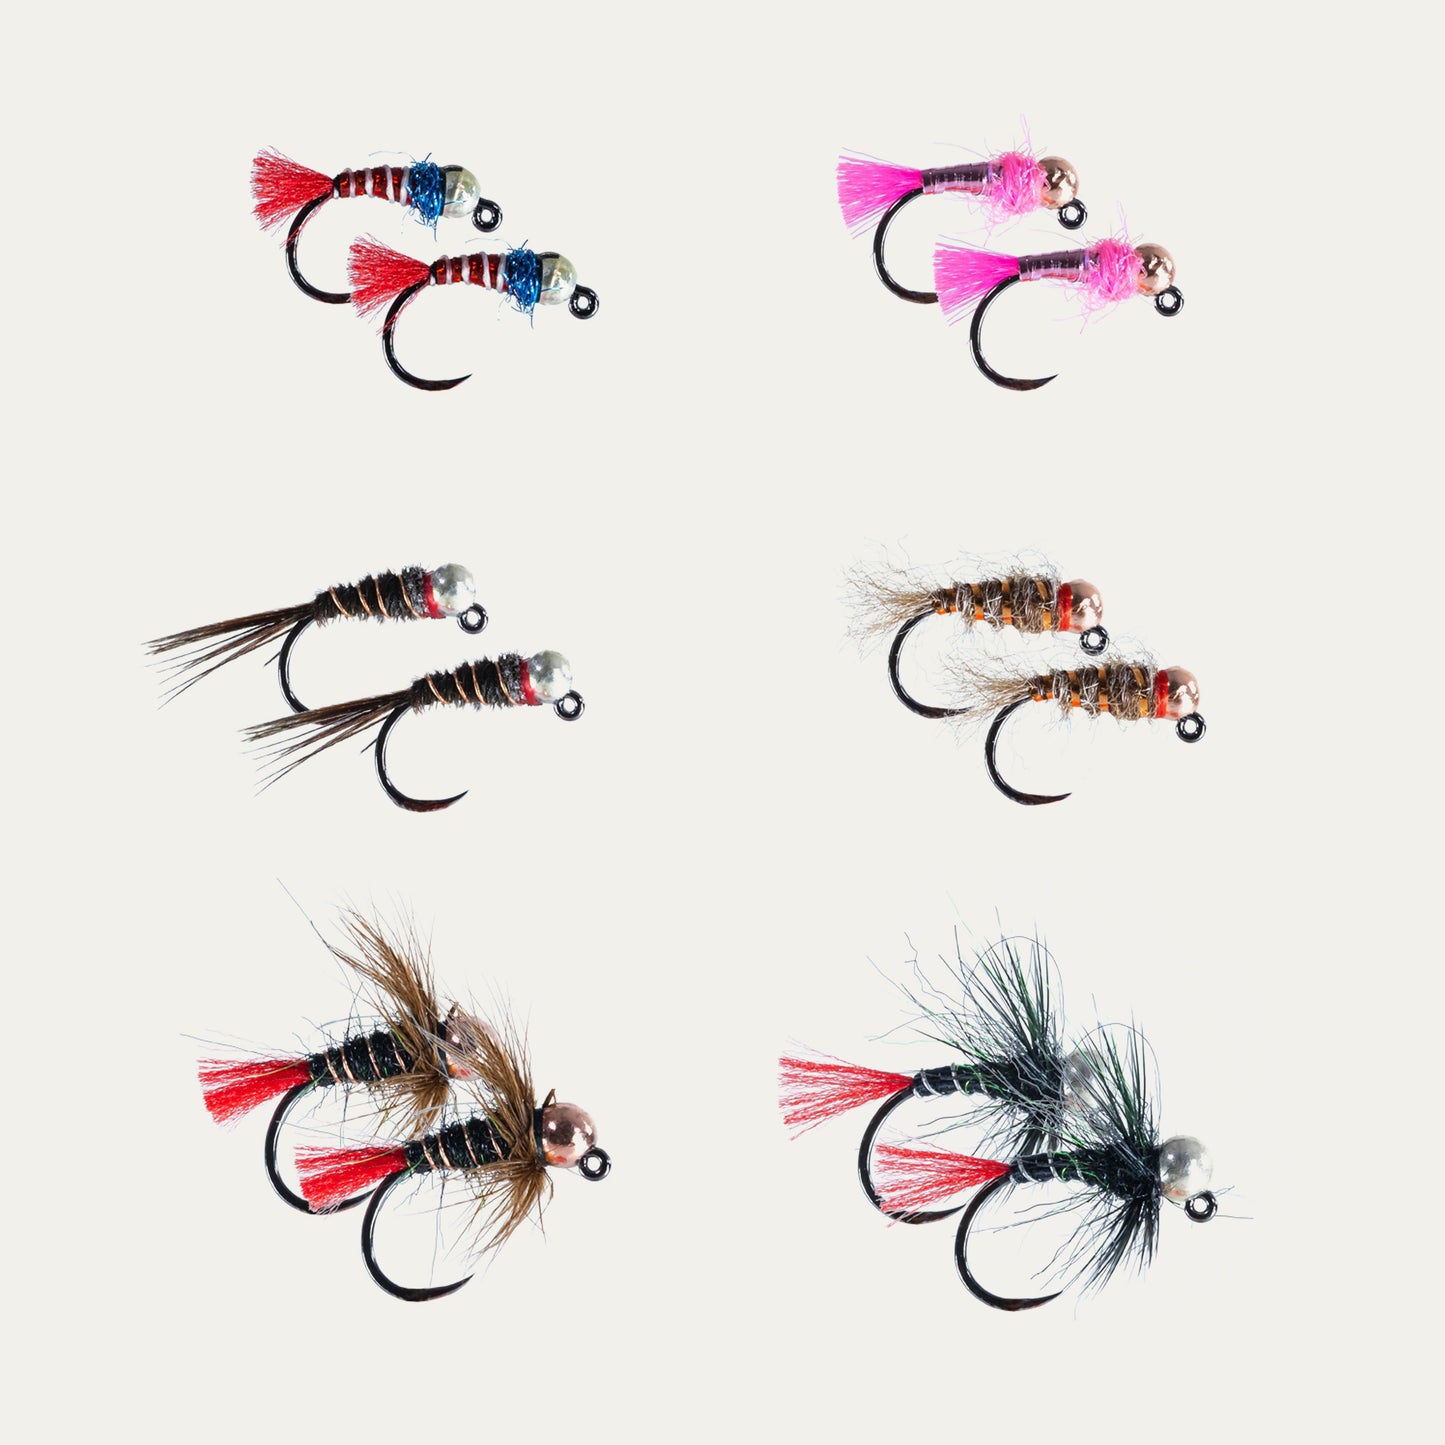 Tactical Tungsten Nymph BugCycle Fly Assortment